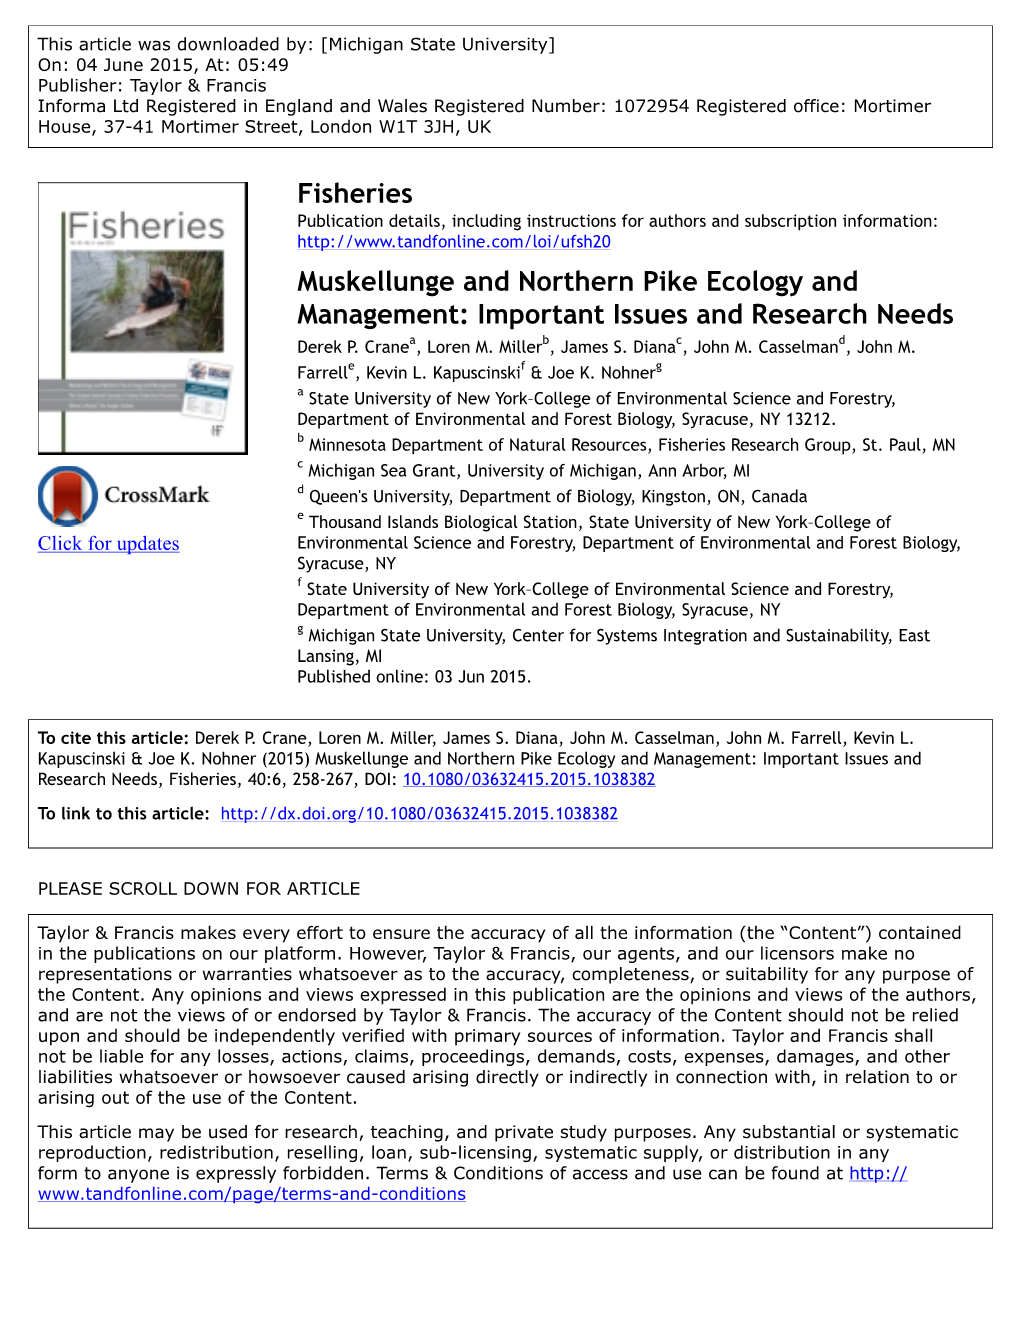 Fisheries Muskellunge and Northern Pike Ecology and Management